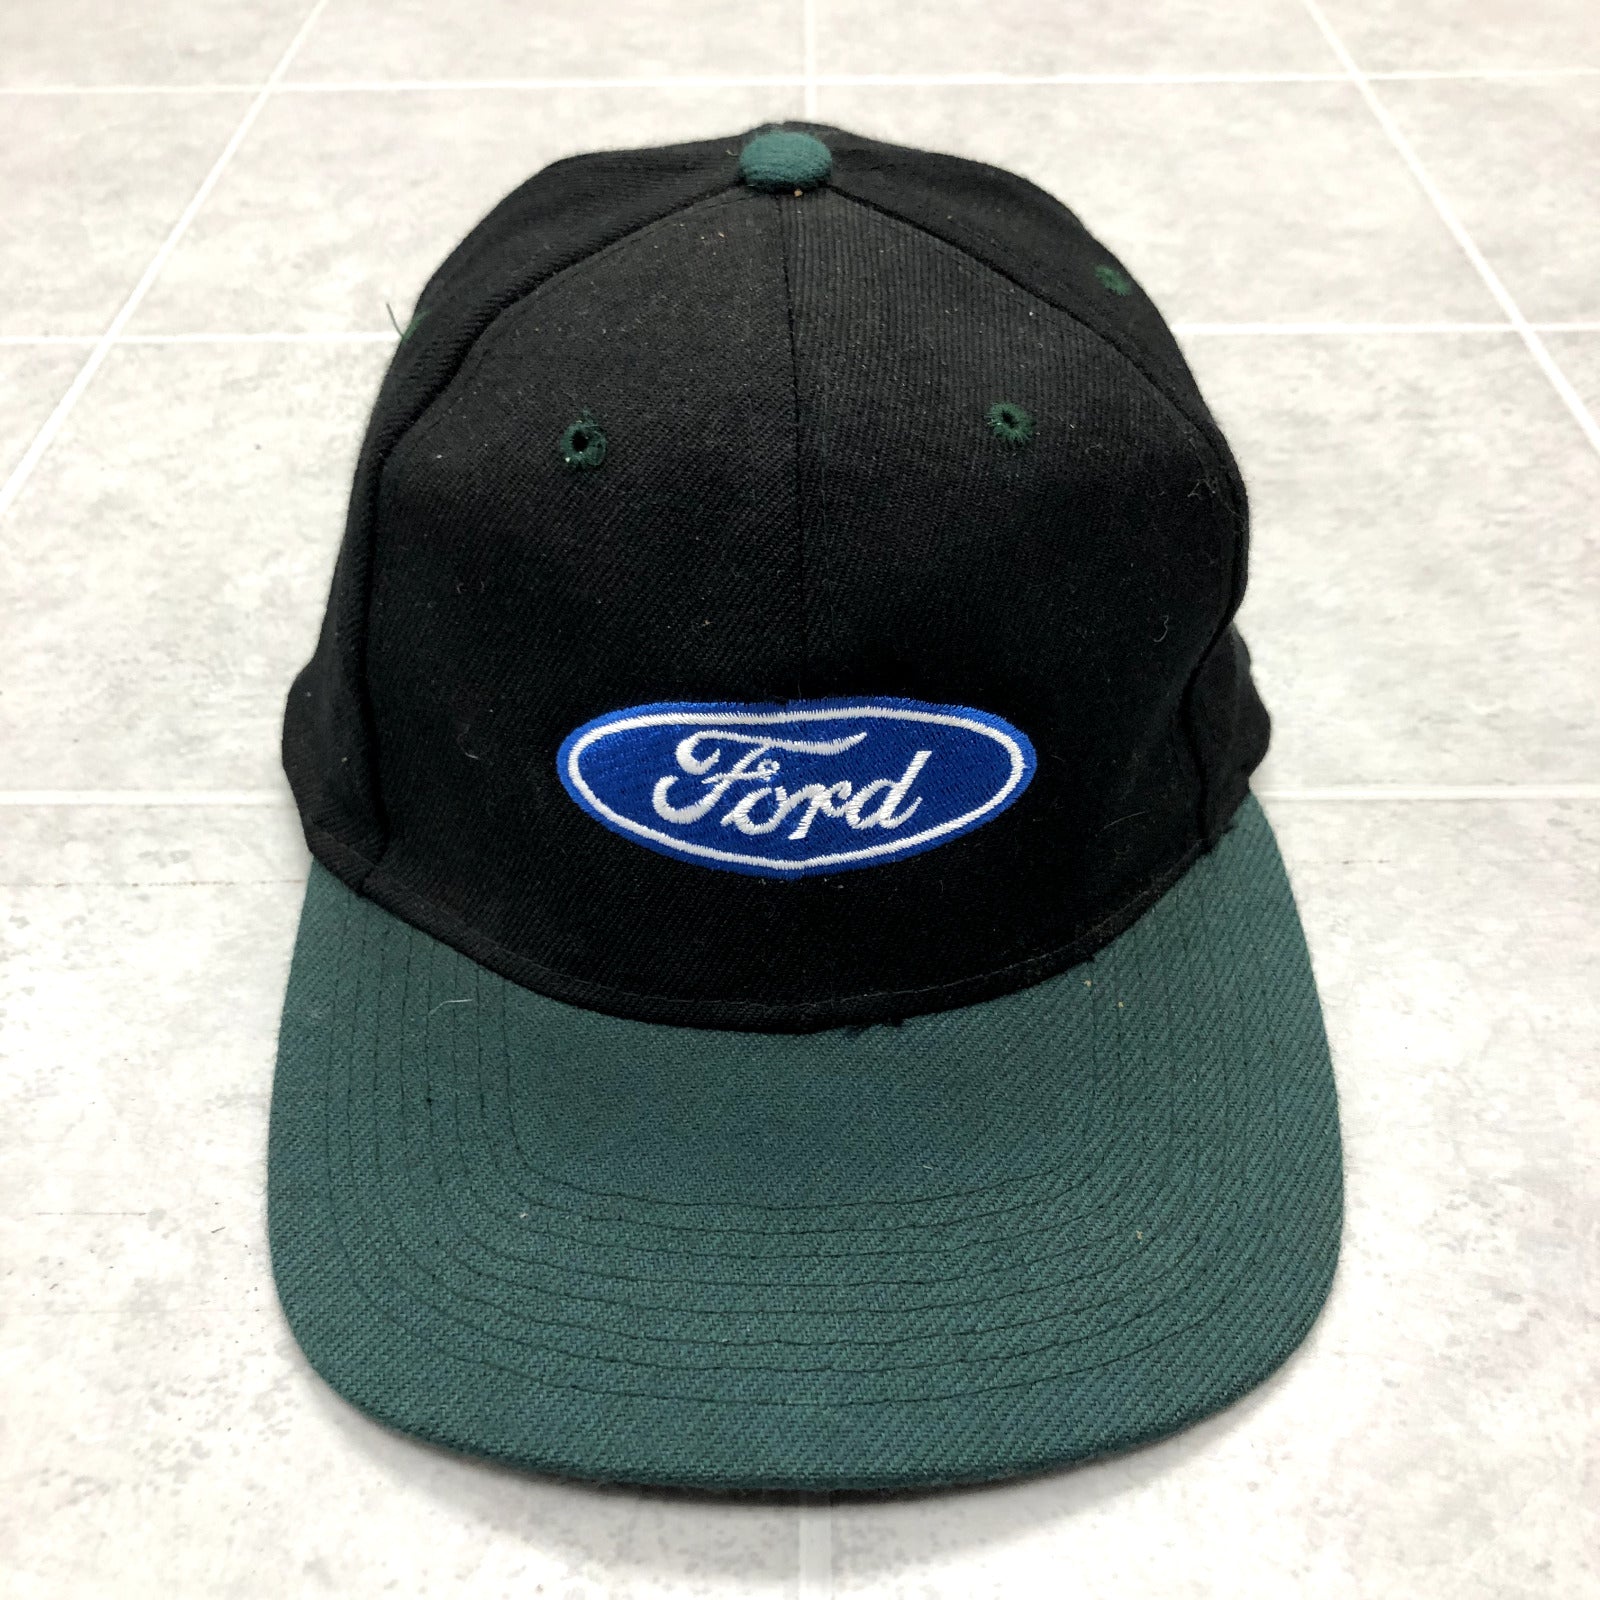 Fairlong Black Snap Back Graphic FORD Logo Baseball Cap Adult One Size